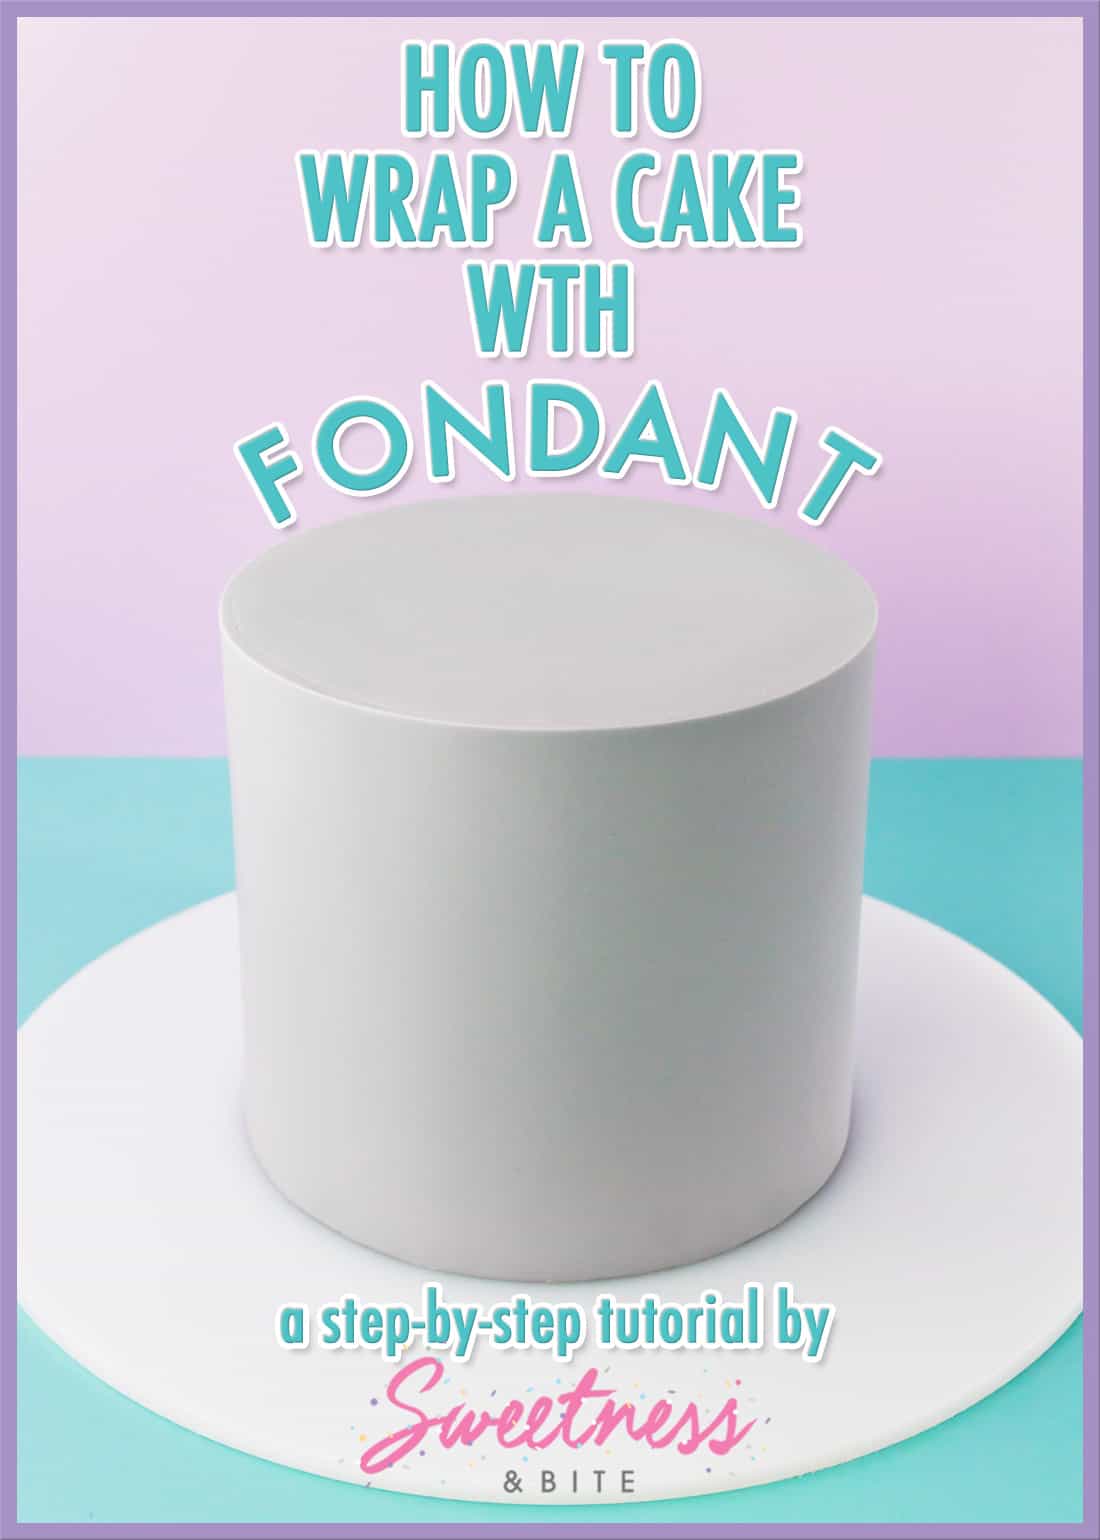 A cake wrapped in pale grey fondant with text overlay reading "how to wrap a cake with fondant - a step-by-step tutorial". 